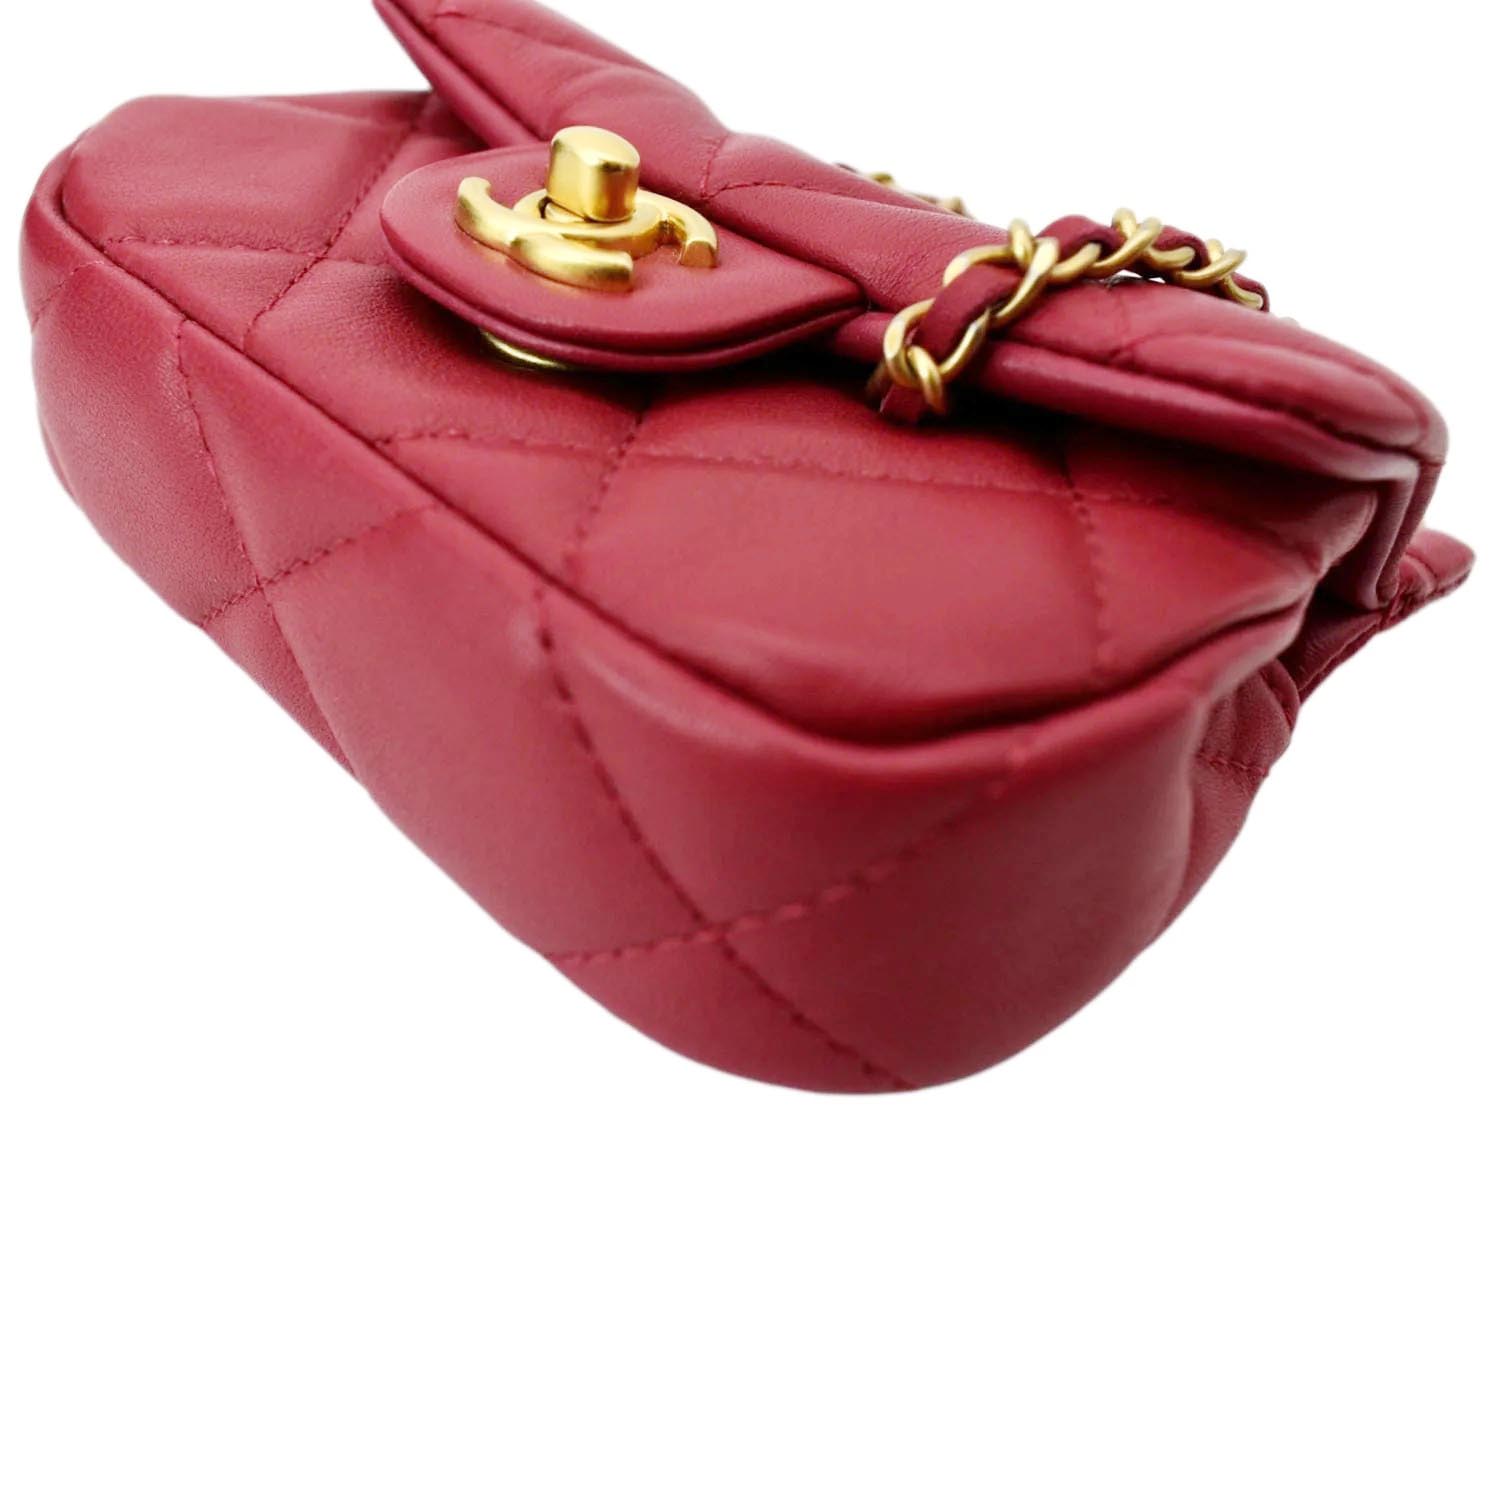 Chanel Pink Quilted Leather Handle Clutch With Chain Extra Mini